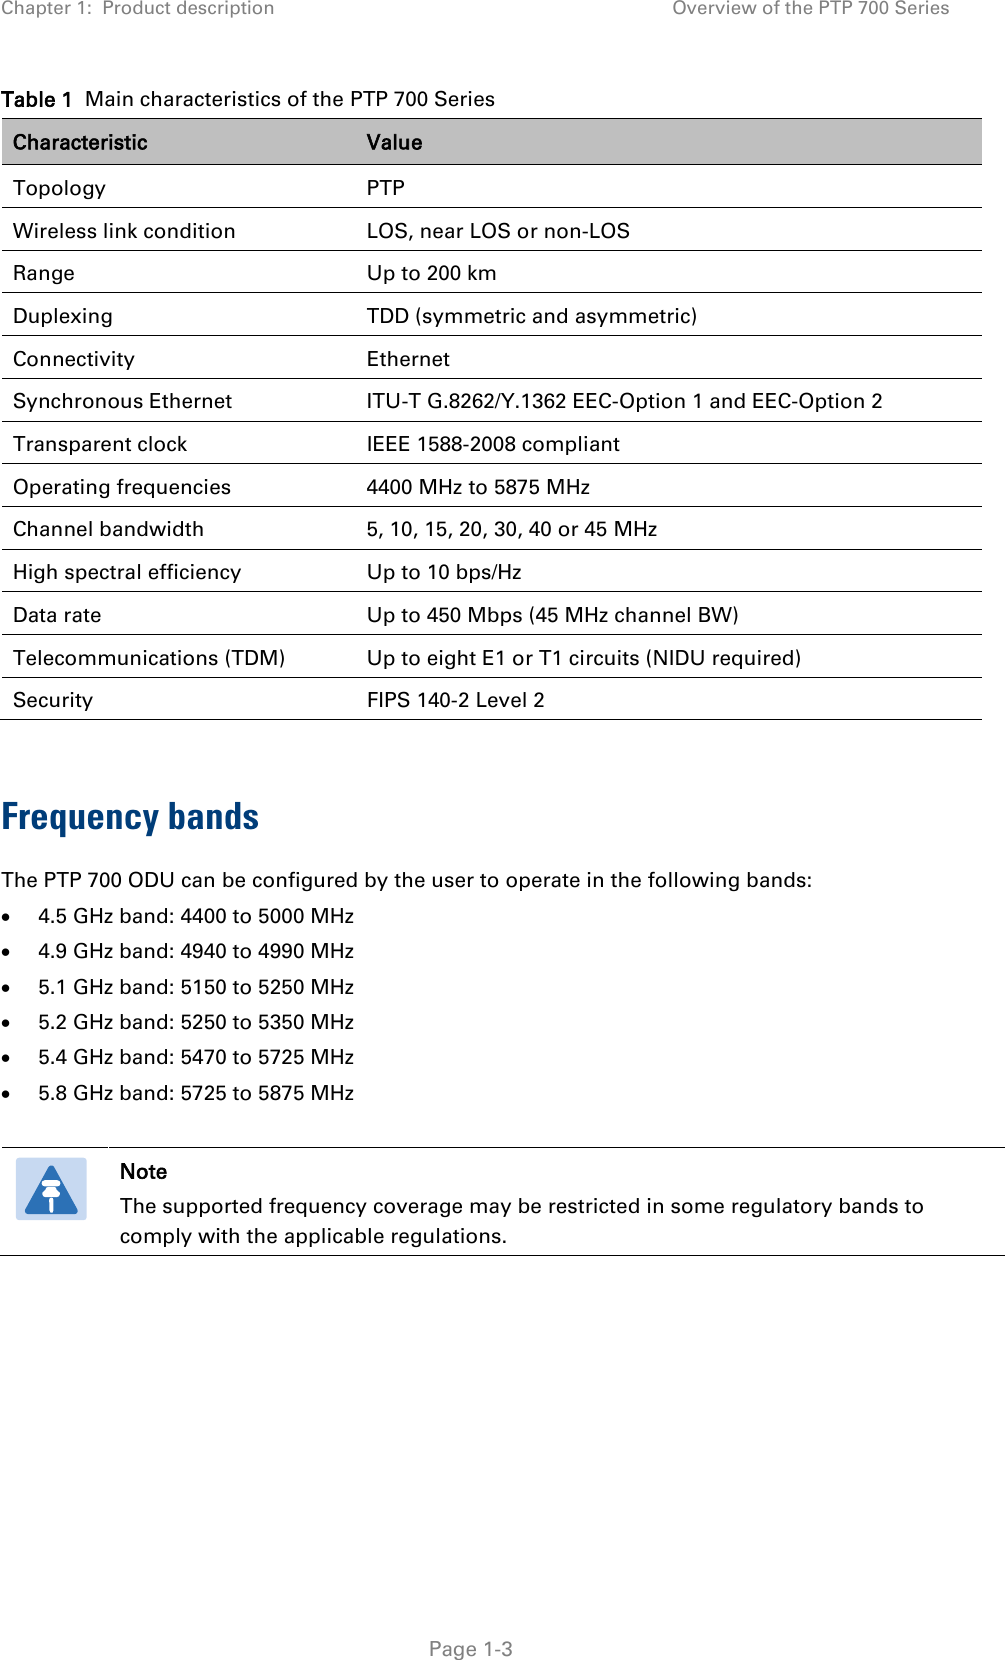 Chapter 1:  Product description Overview of the PTP 700 Series  Table 1  Main characteristics of the PTP 700 Series Characteristic Value Topology PTP Wireless link condition LOS, near LOS or non-LOS Range Up to 200 km Duplexing TDD (symmetric and asymmetric) Connectivity Ethernet Synchronous Ethernet ITU-T G.8262/Y.1362 EEC-Option 1 and EEC-Option 2 Transparent clock IEEE 1588-2008 compliant Operating frequencies 4400 MHz to 5875 MHz Channel bandwidth 5, 10, 15, 20, 30, 40 or 45 MHz High spectral efficiency Up to 10 bps/Hz Data rate Up to 450 Mbps (45 MHz channel BW) Telecommunications (TDM) Up to eight E1 or T1 circuits (NIDU required) Security FIPS 140-2 Level 2  Frequency bands The PTP 700 ODU can be configured by the user to operate in the following bands: • 4.5 GHz band: 4400 to 5000 MHz • 4.9 GHz band: 4940 to 4990 MHz • 5.1 GHz band: 5150 to 5250 MHz • 5.2 GHz band: 5250 to 5350 MHz • 5.4 GHz band: 5470 to 5725 MHz • 5.8 GHz band: 5725 to 5875 MHz   Note The supported frequency coverage may be restricted in some regulatory bands to comply with the applicable regulations.   Page 1-3 